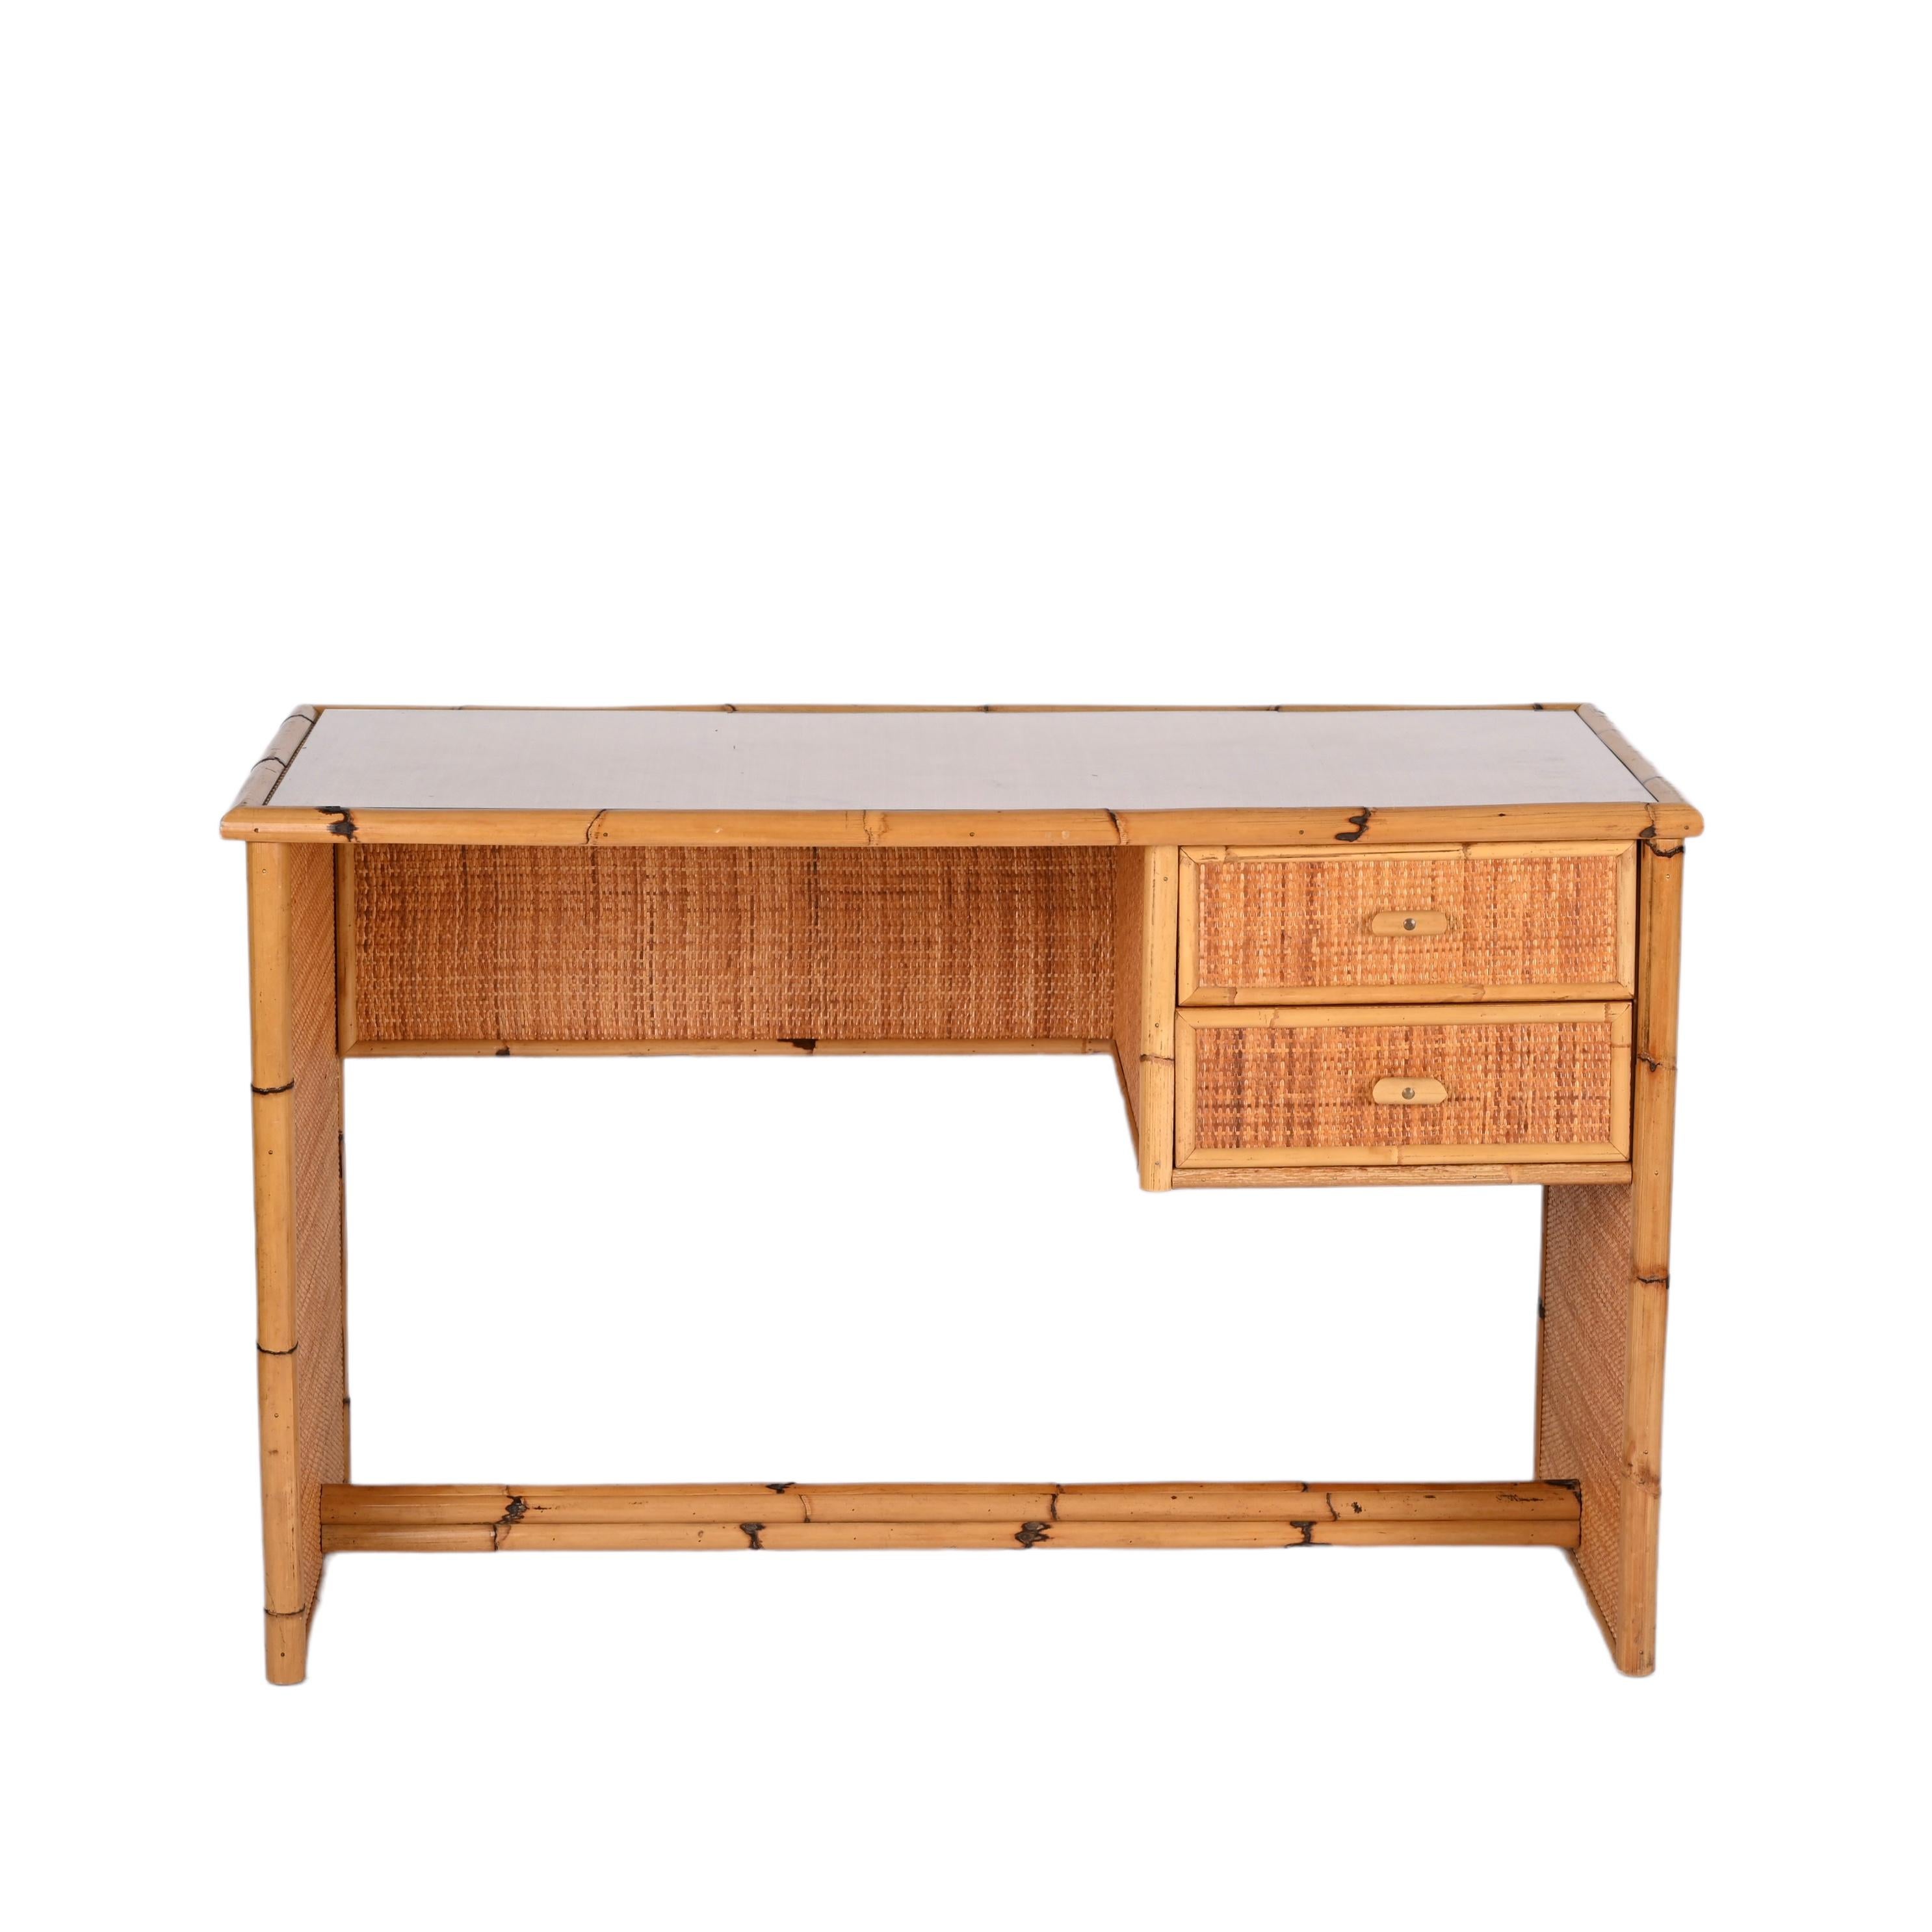 Midcentury Glass Top, Bamboo and Wicker Italian Desk with Drawers, 1980s In Good Condition For Sale In Roma, IT